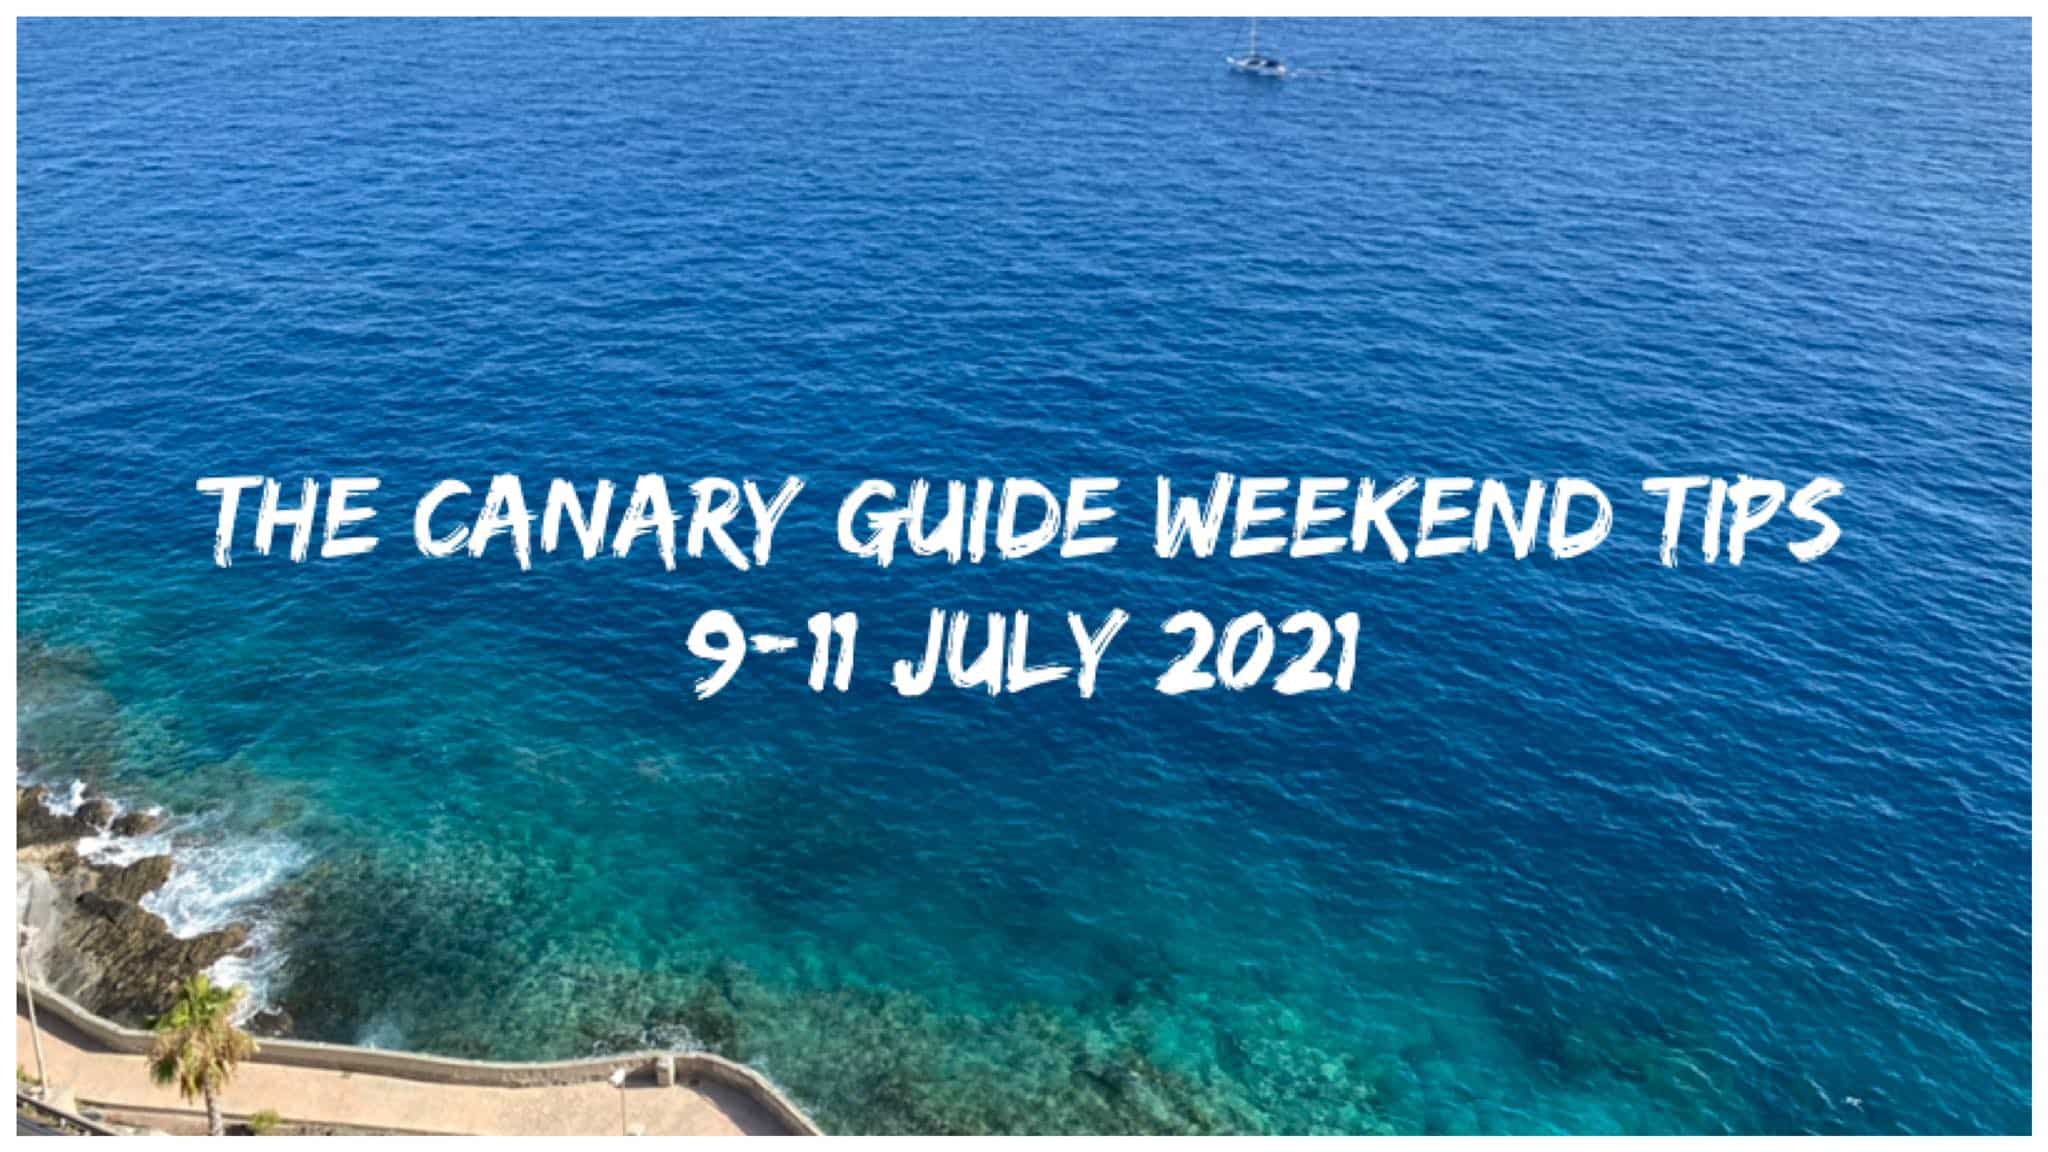 The Canary Guide Weekend Tips 9-11 July 2021